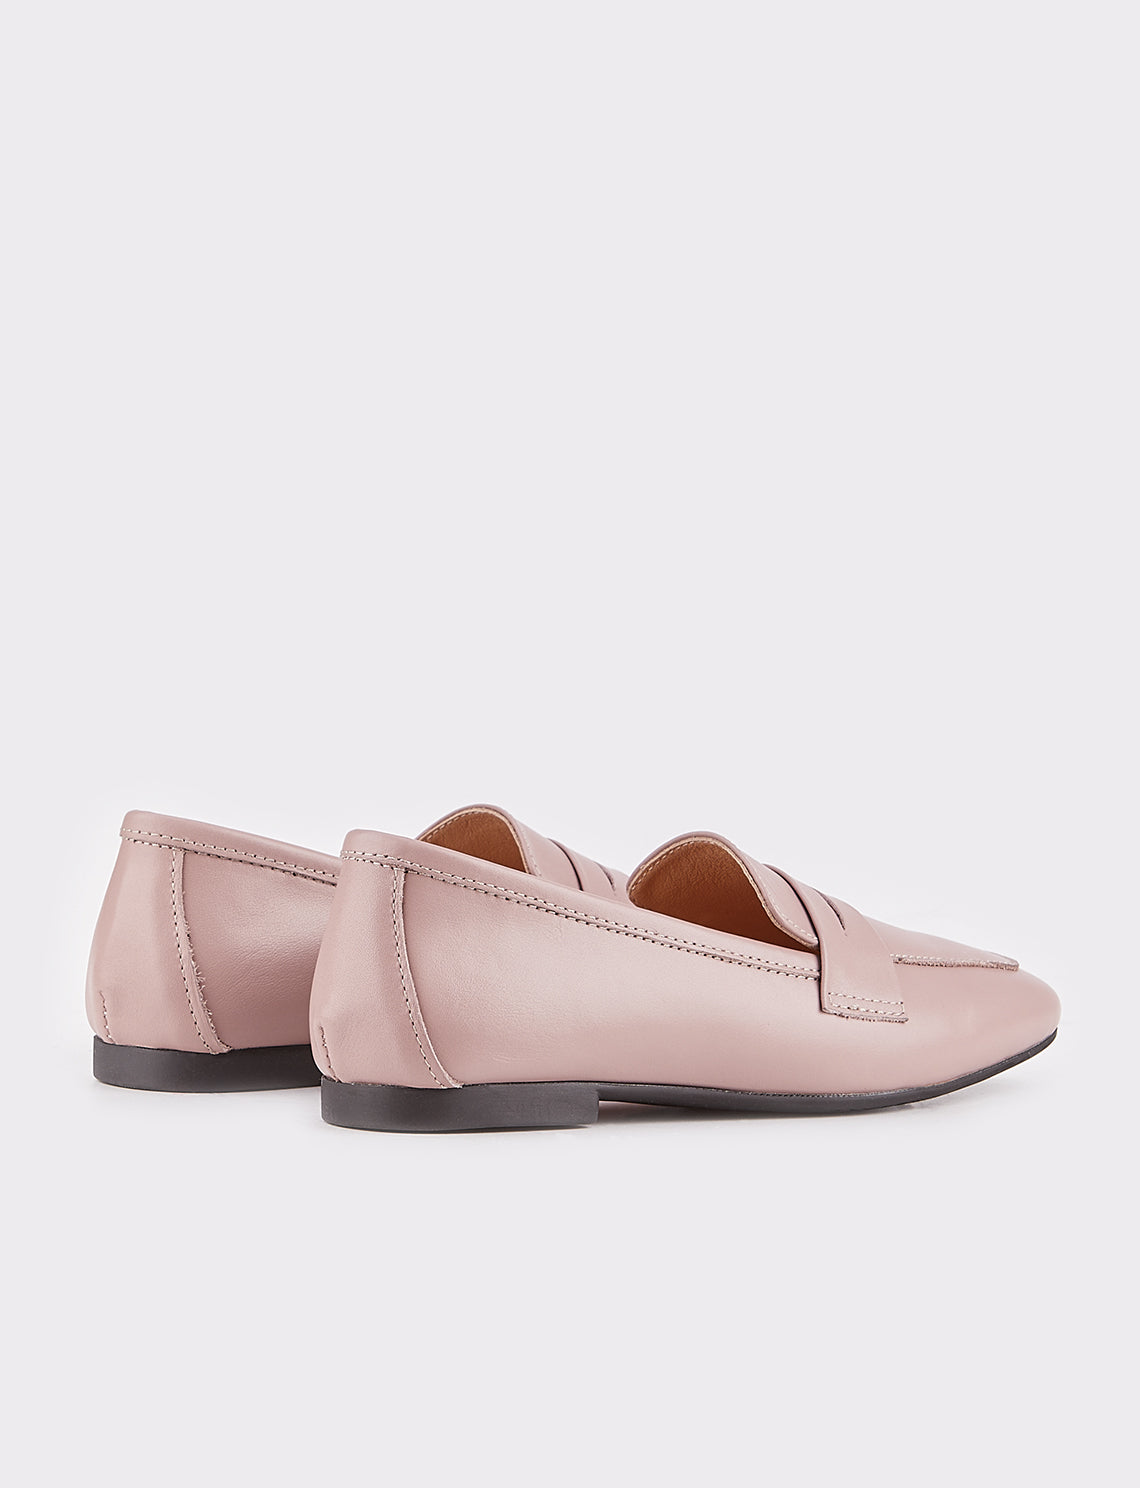 Women Pink Genuine Leather Square Toe Flat Shoes